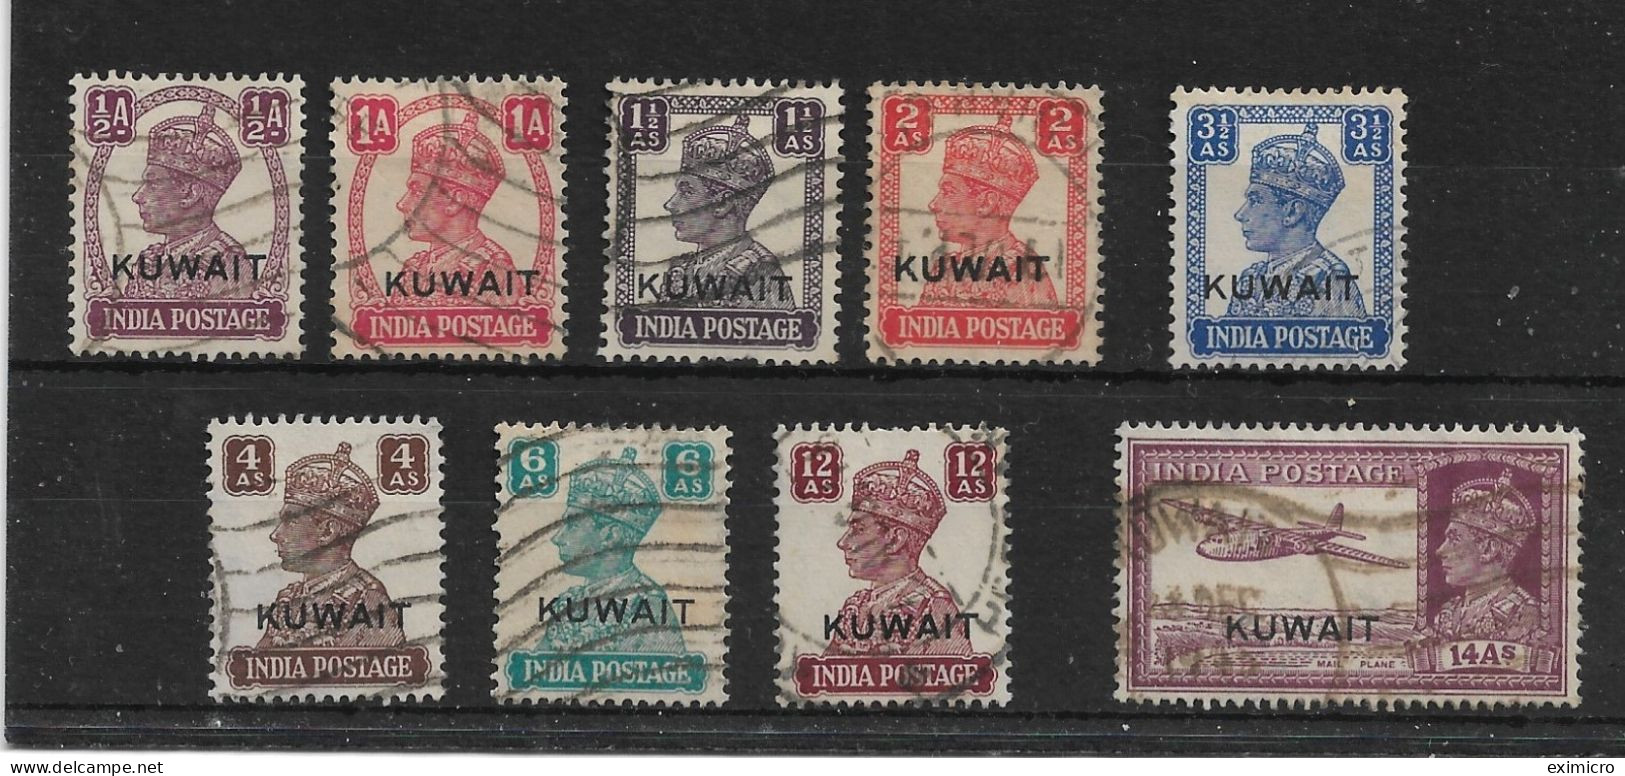 KUWAIT 1945 VALUES TO 14a SG 55,57,59,60,60a,62,63 FINE USED Cat £140+ - Koeweit